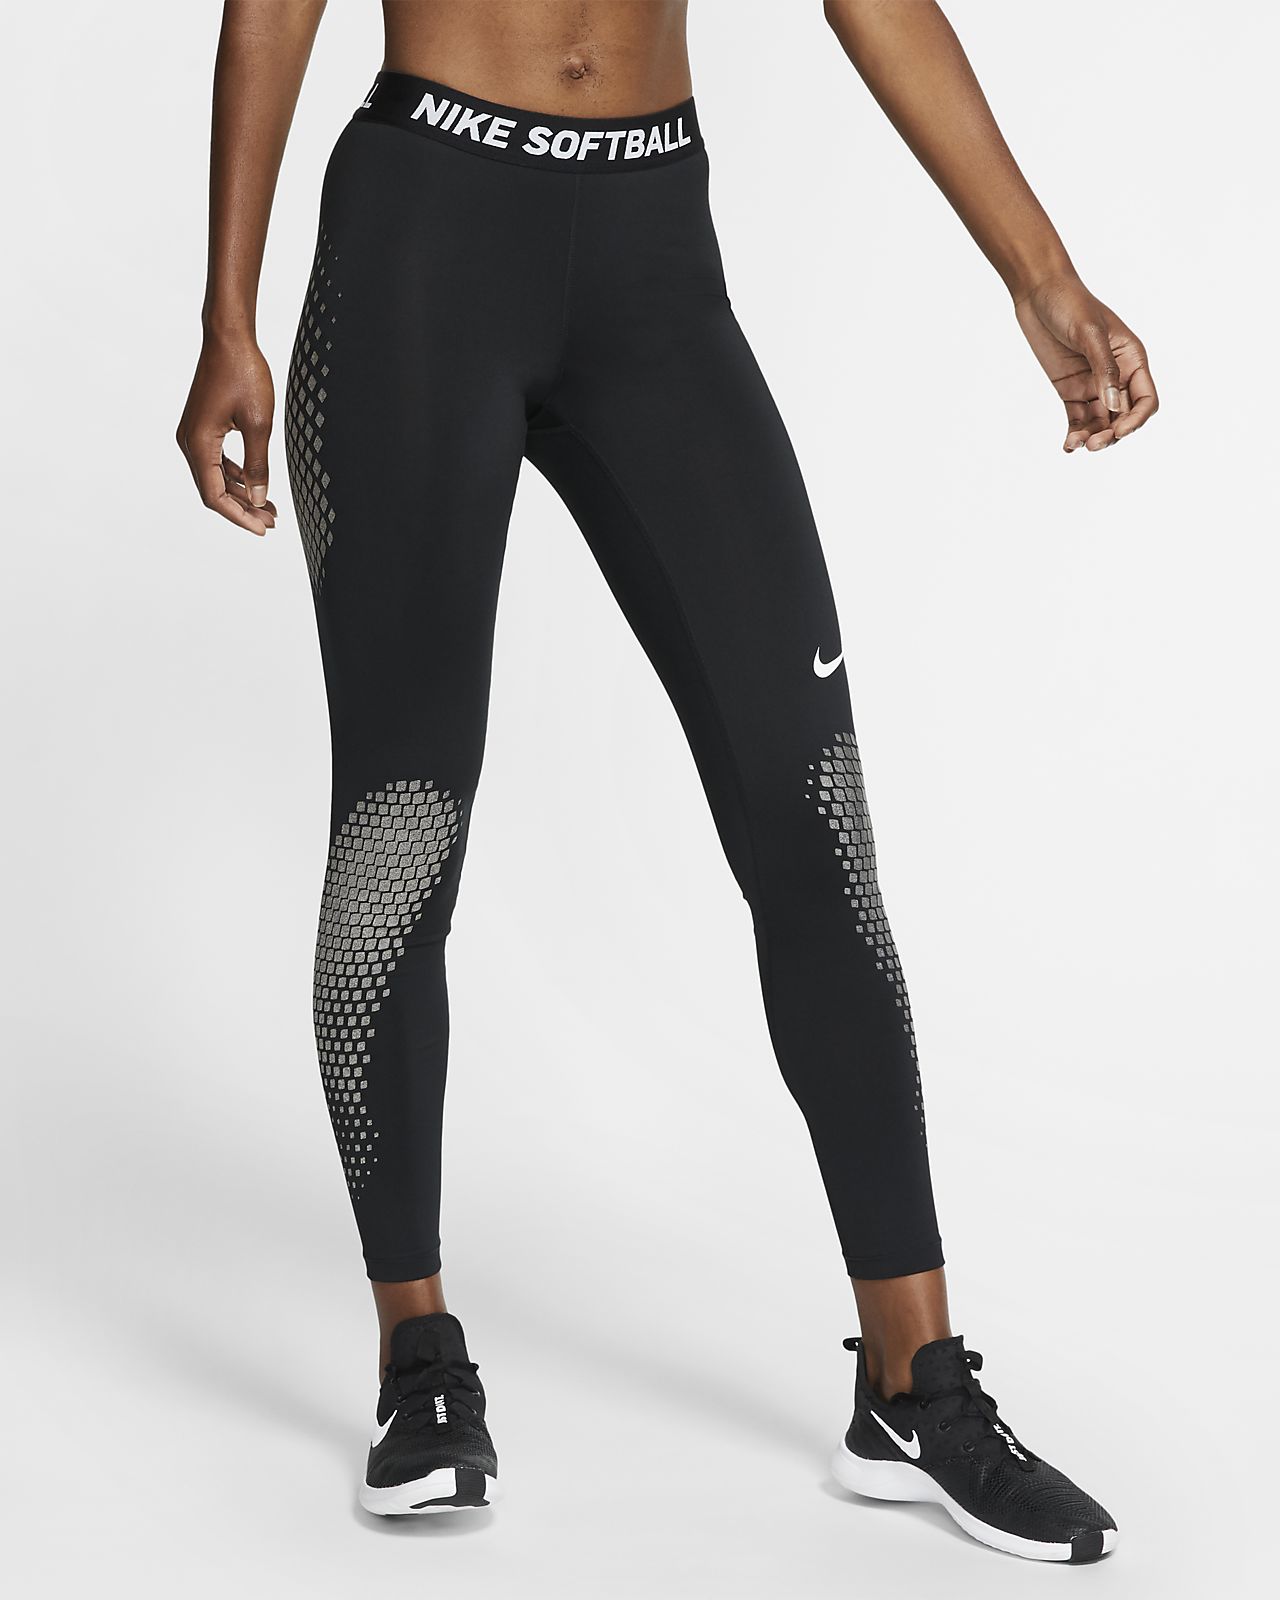 NIKE MODEL WOMENS DRI-FIT ESSENTIAL LONG RUNNING TIGHTS IN STOCK ...